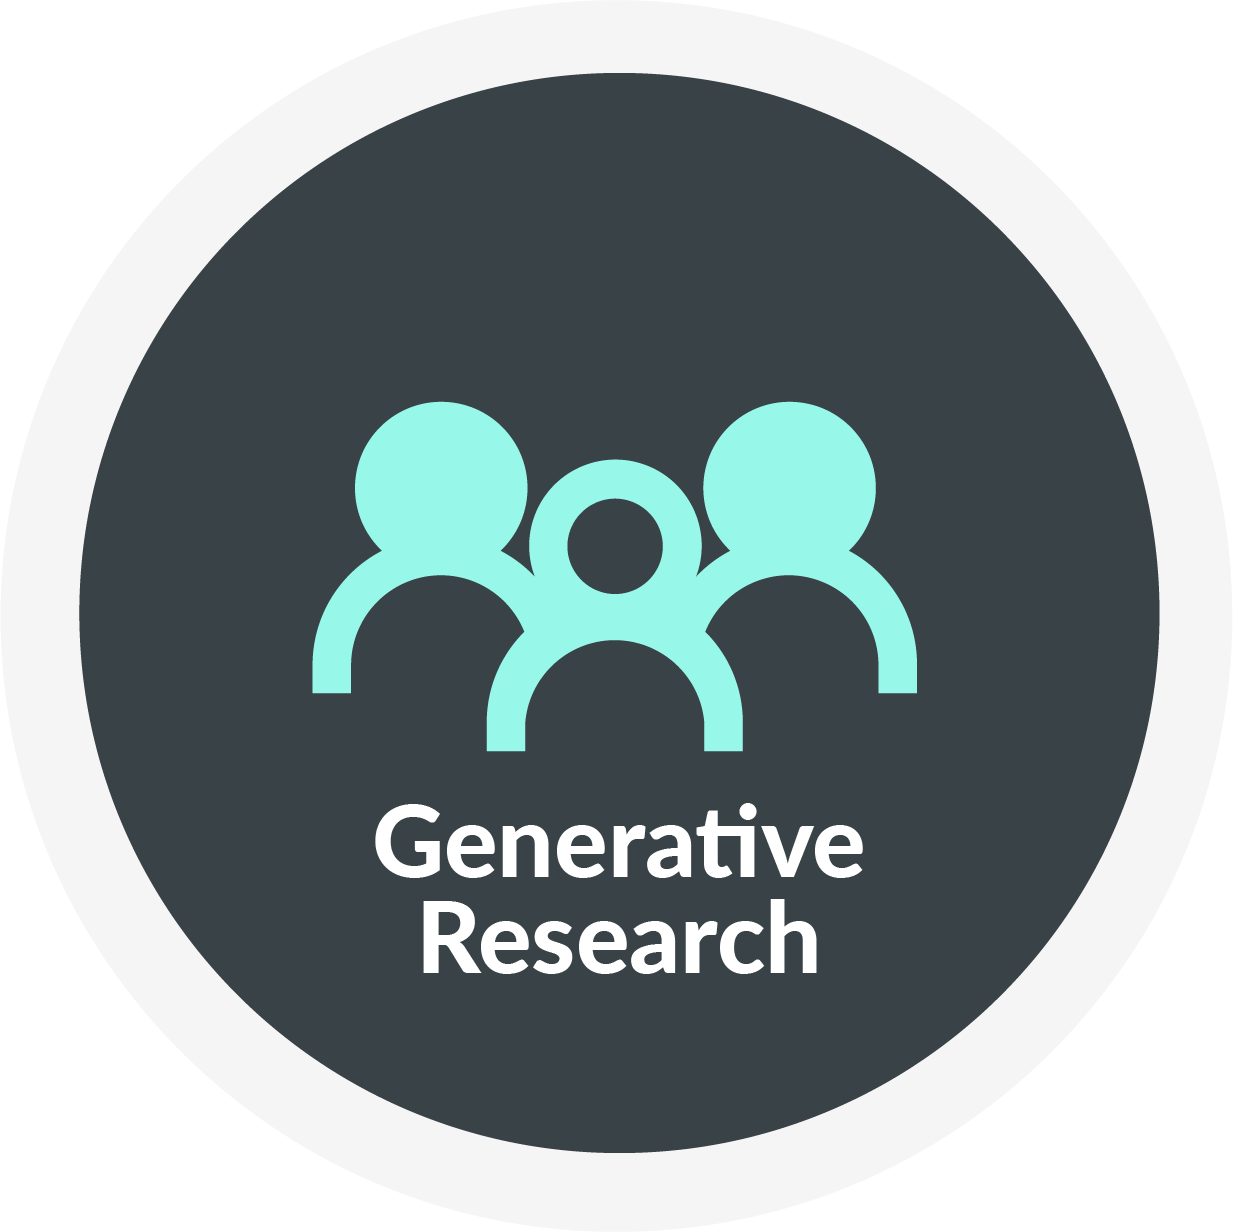 Generative Research@4x.png